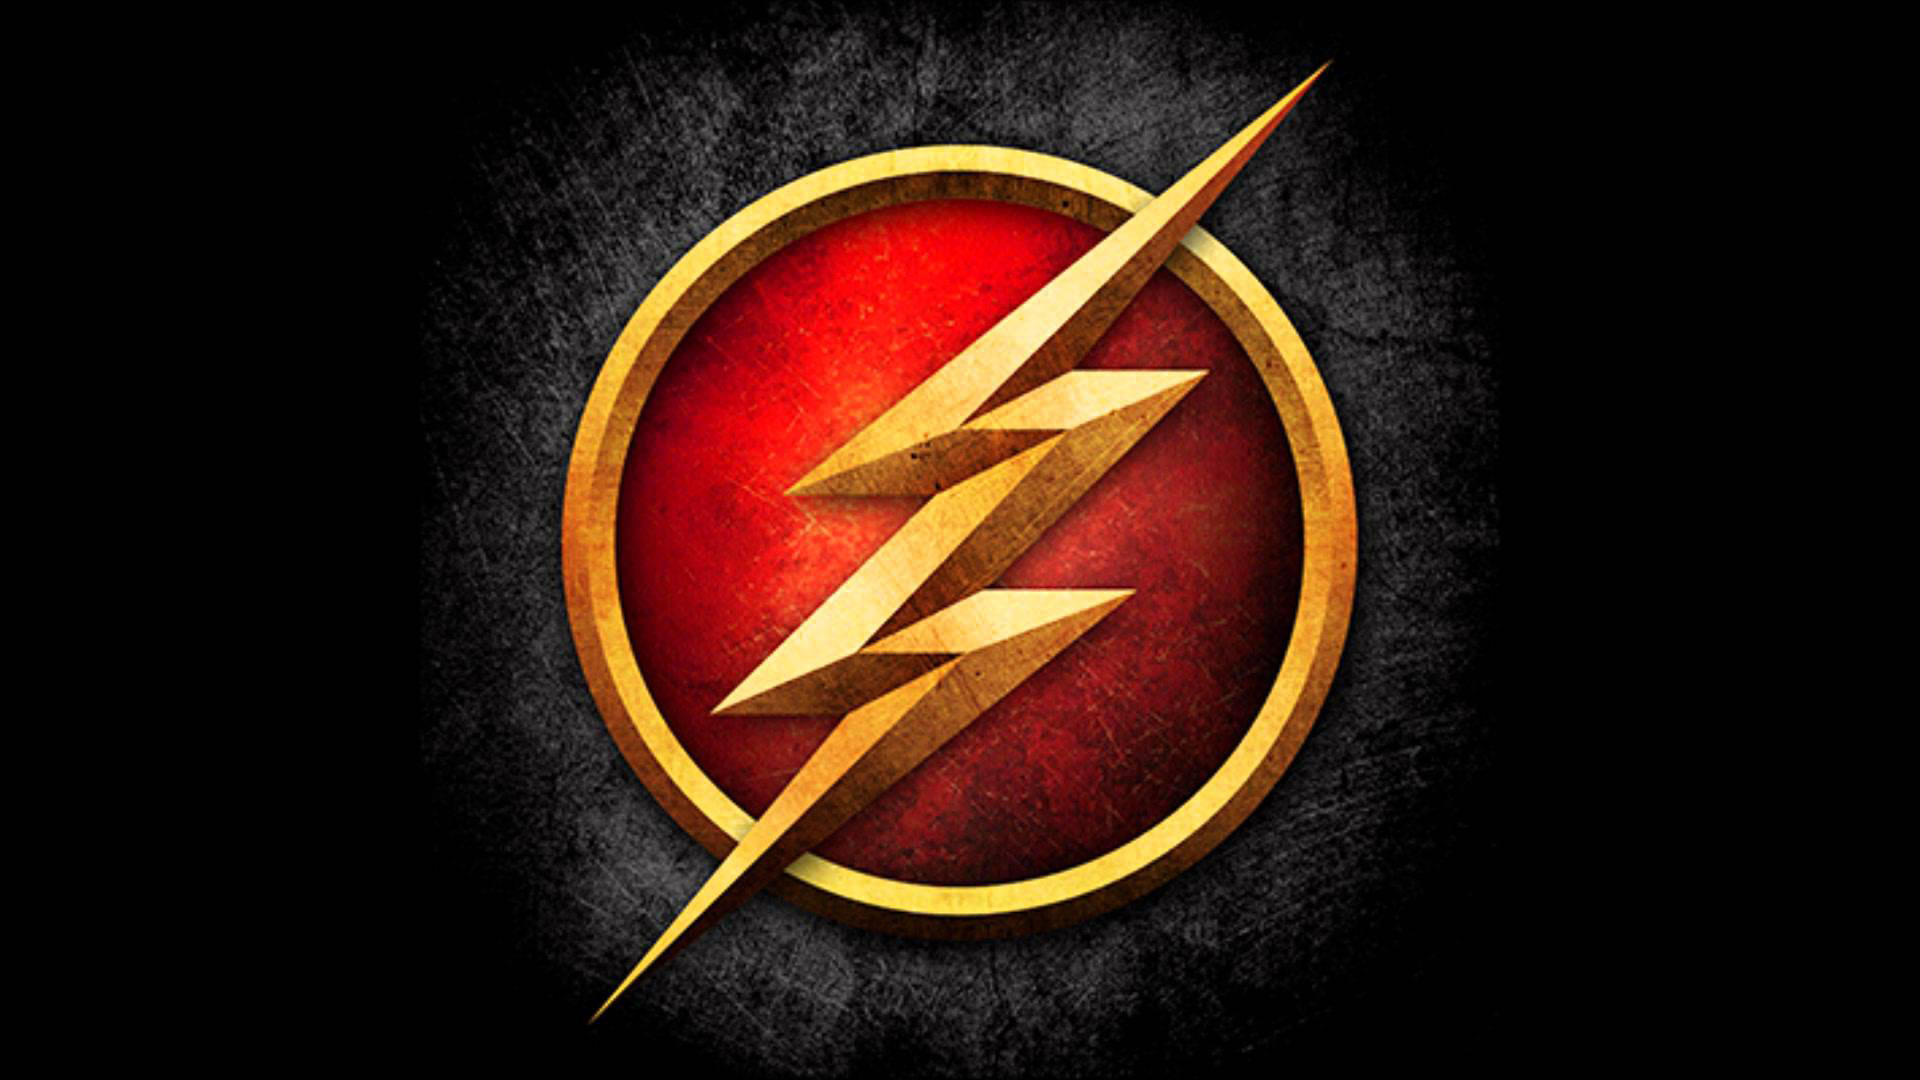 The flash wallpaper hd Download 19201200 The Flash Wallpapers HD 38 Wallpapers